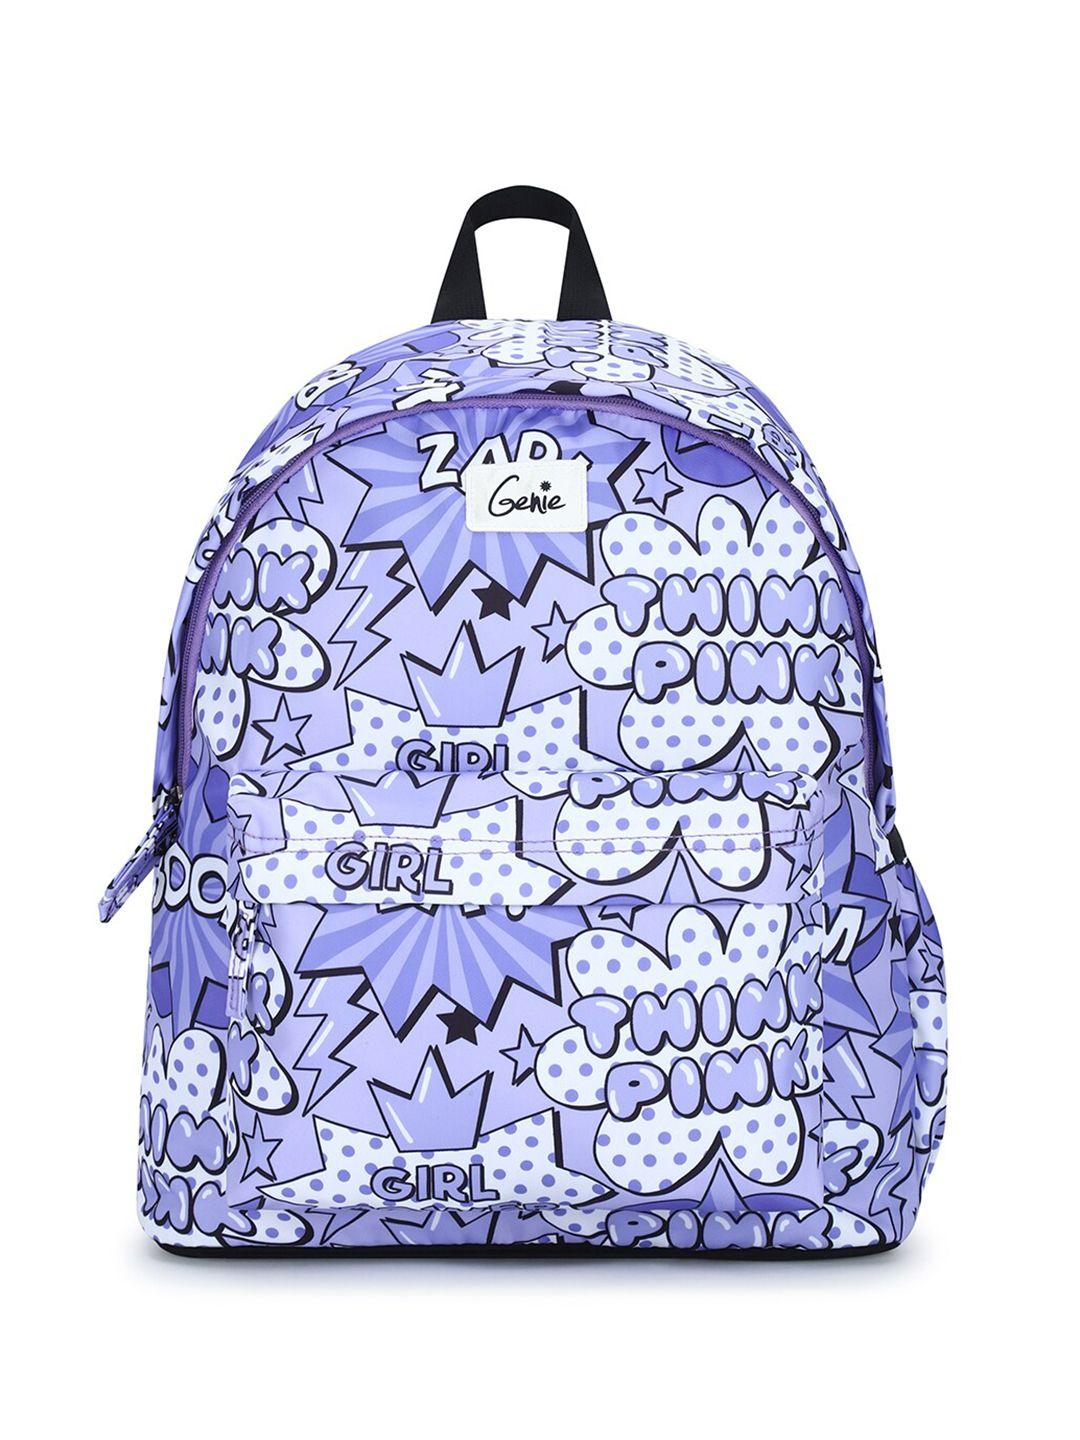 genie women graphic printed backpack - up to 16 inch laptop